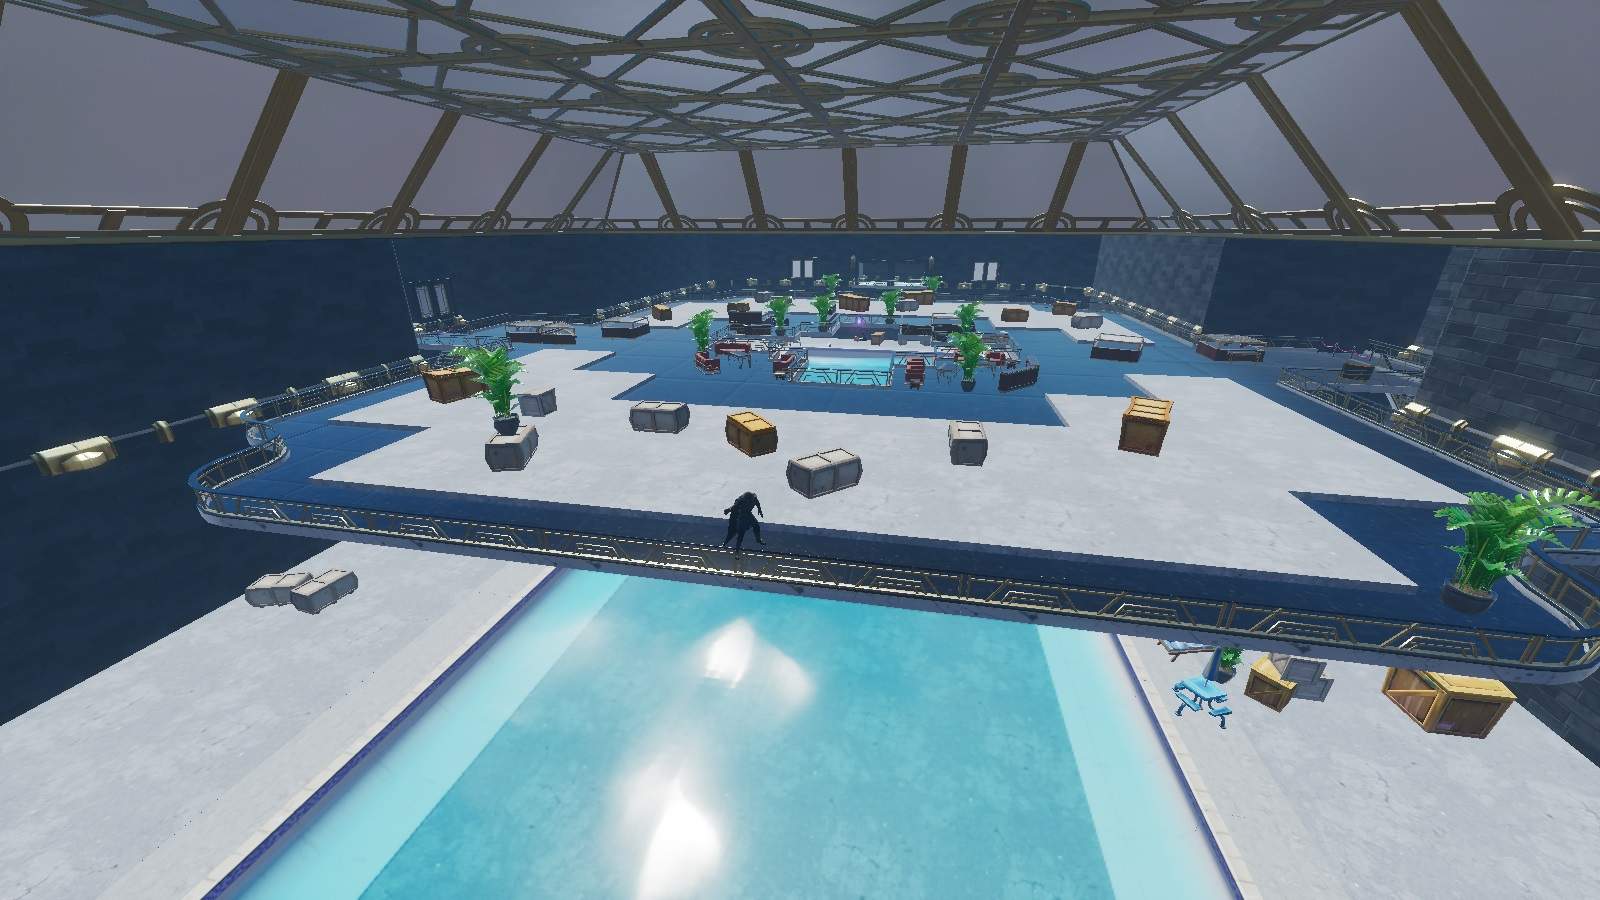 SWIMMING POOL - FFA AND COLORS